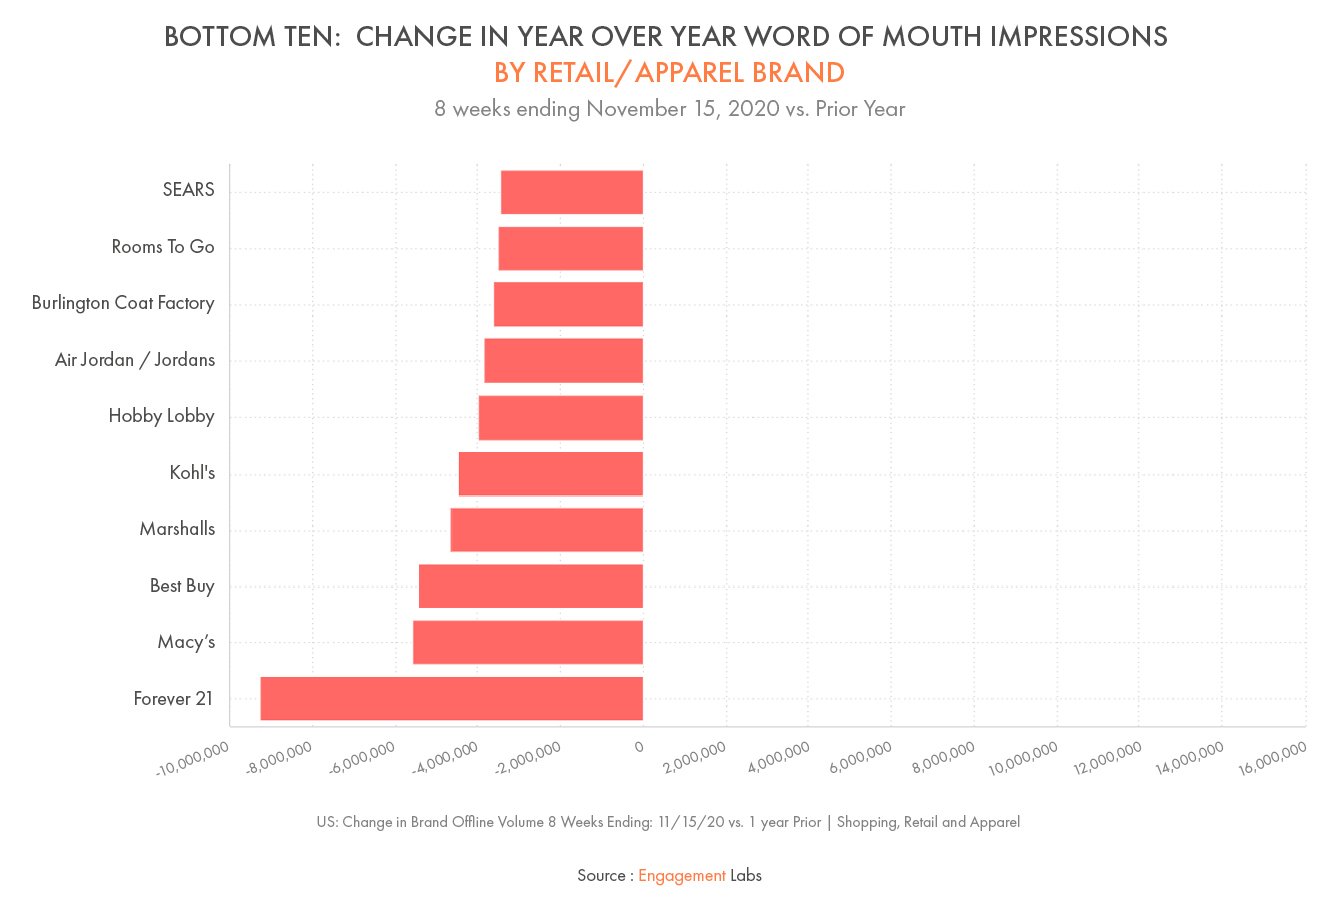 Bottom Ten:  Change in Year Over Year Word of Mouth Impressions by Retail/Apparel Brand